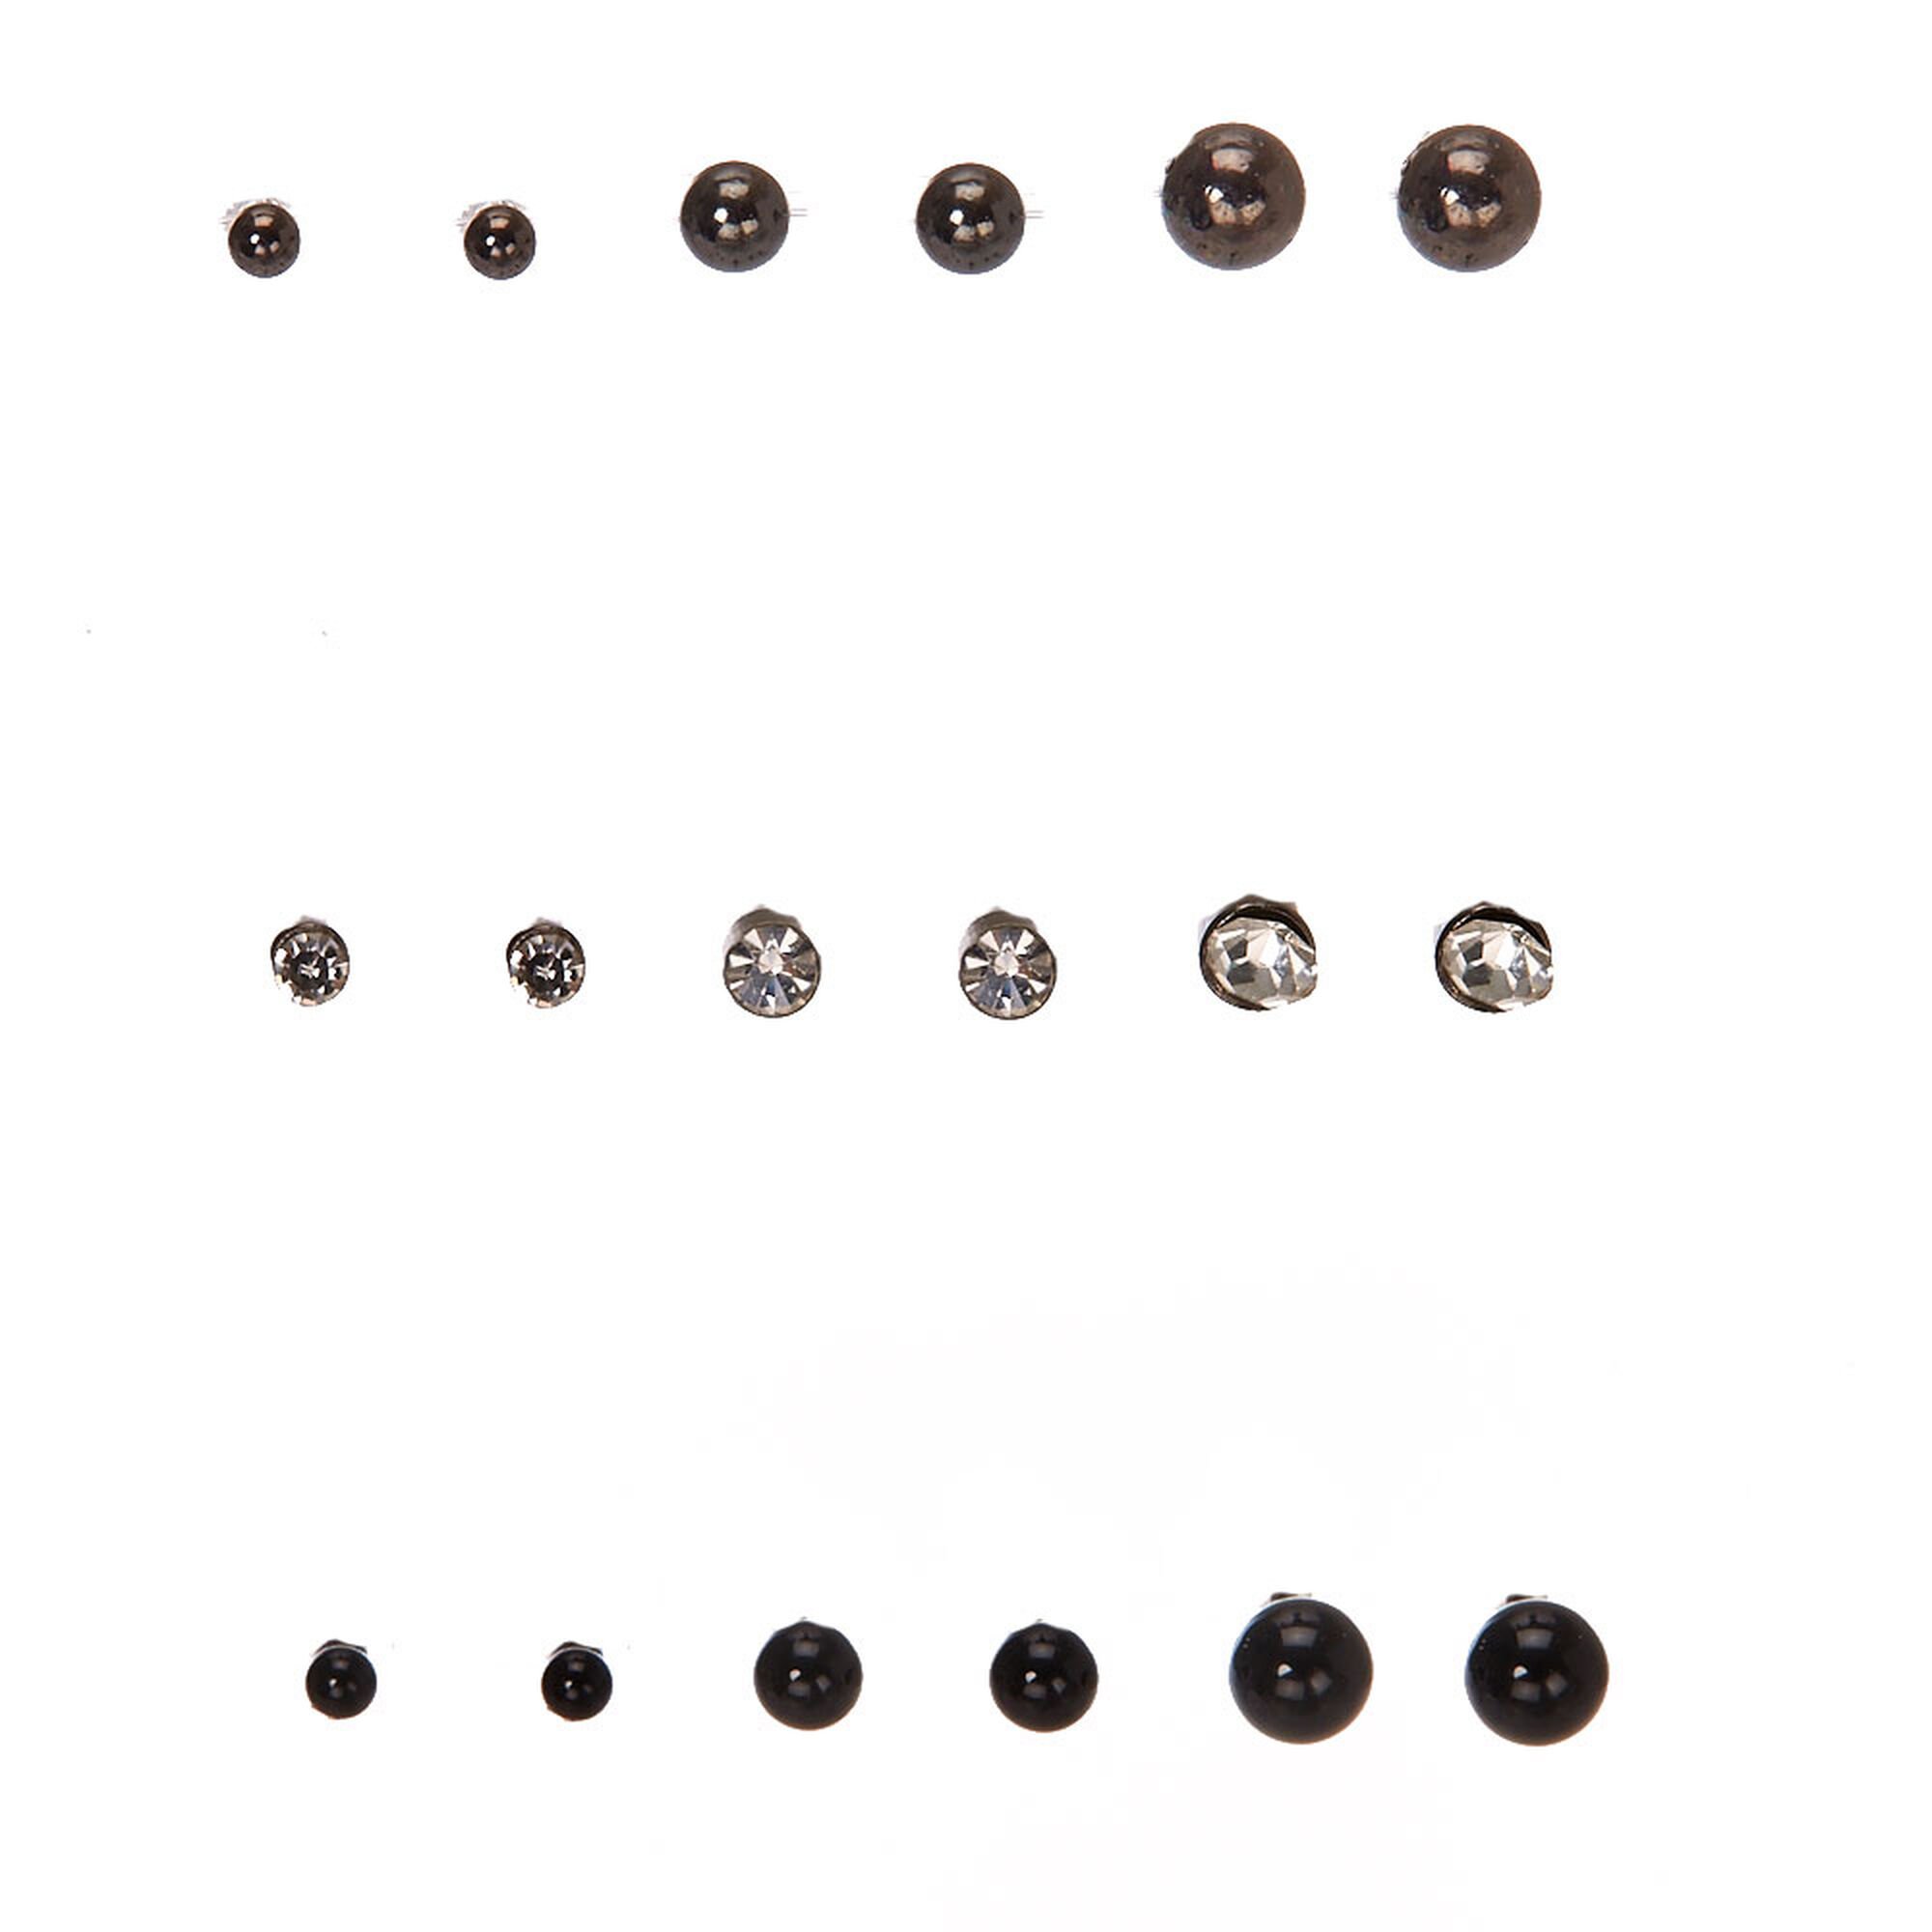 View Claires Hematite Tiny Ball Stud Earrings Black information